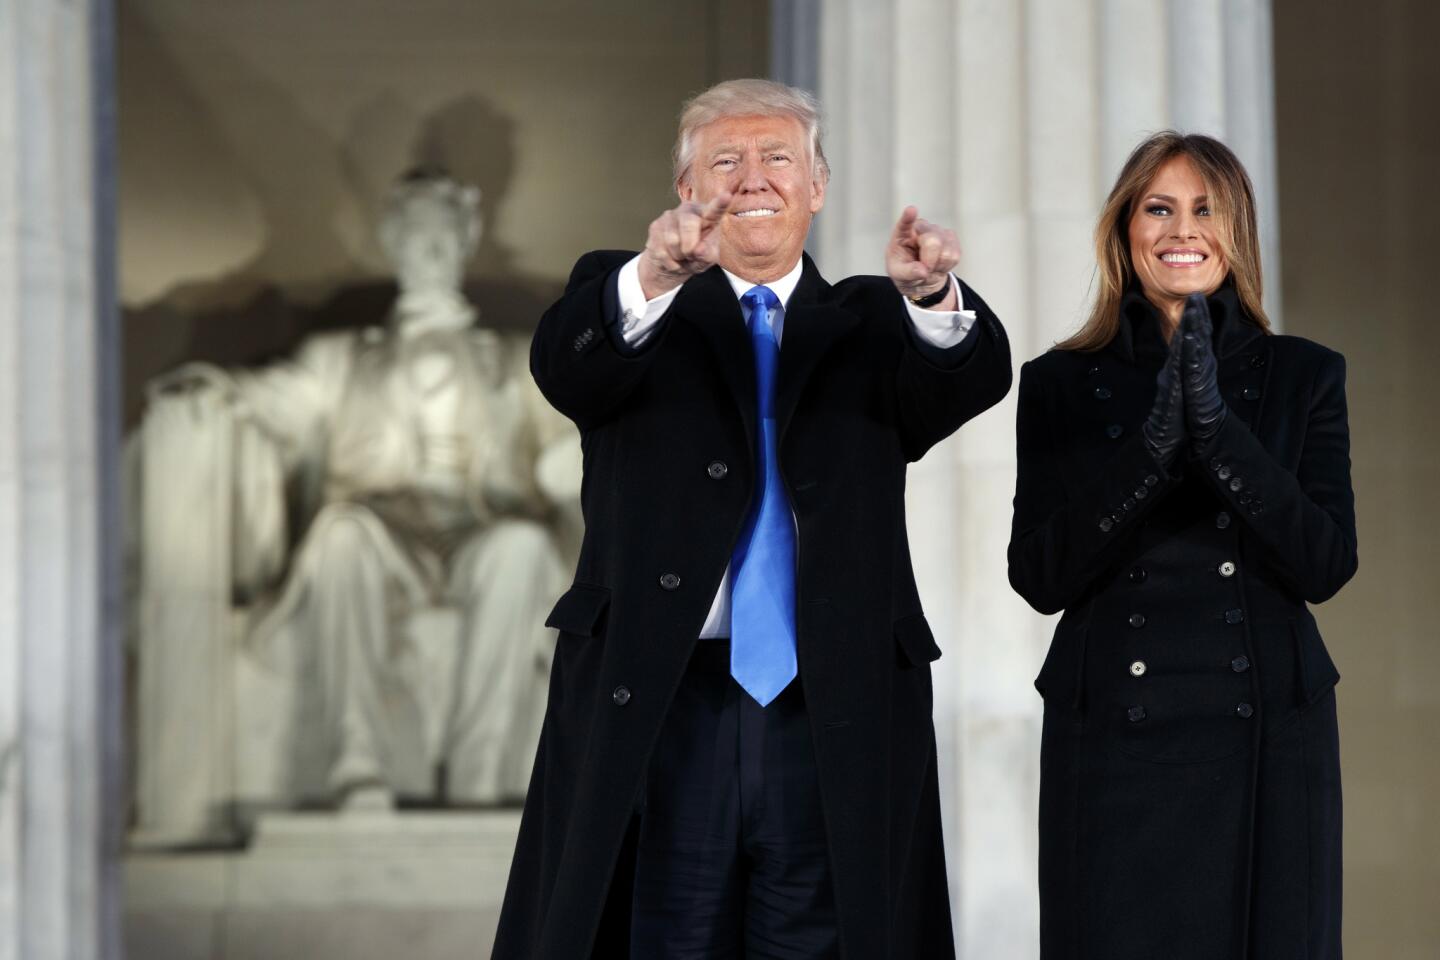 President-elect Donald Trump, left, and his wife Melania Trump arrive to the "Make America Great Again Welcome Concert" at the Lincoln Memorial, Thursday, Jan. 19 in Washington.